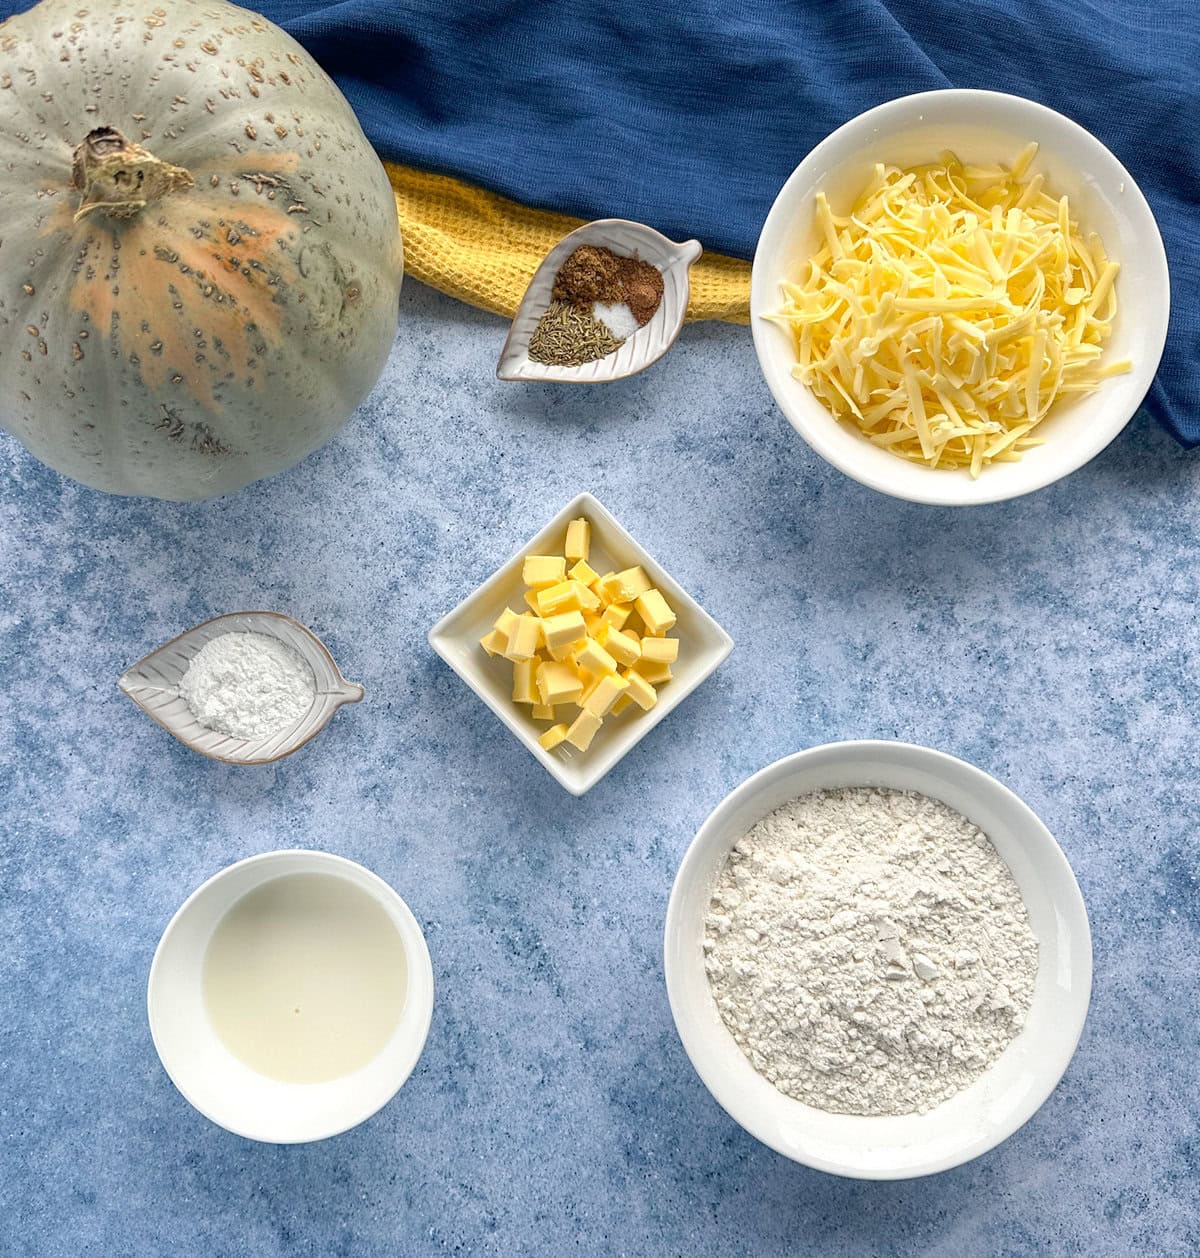 Ingredients for pumpkin and cheese scones